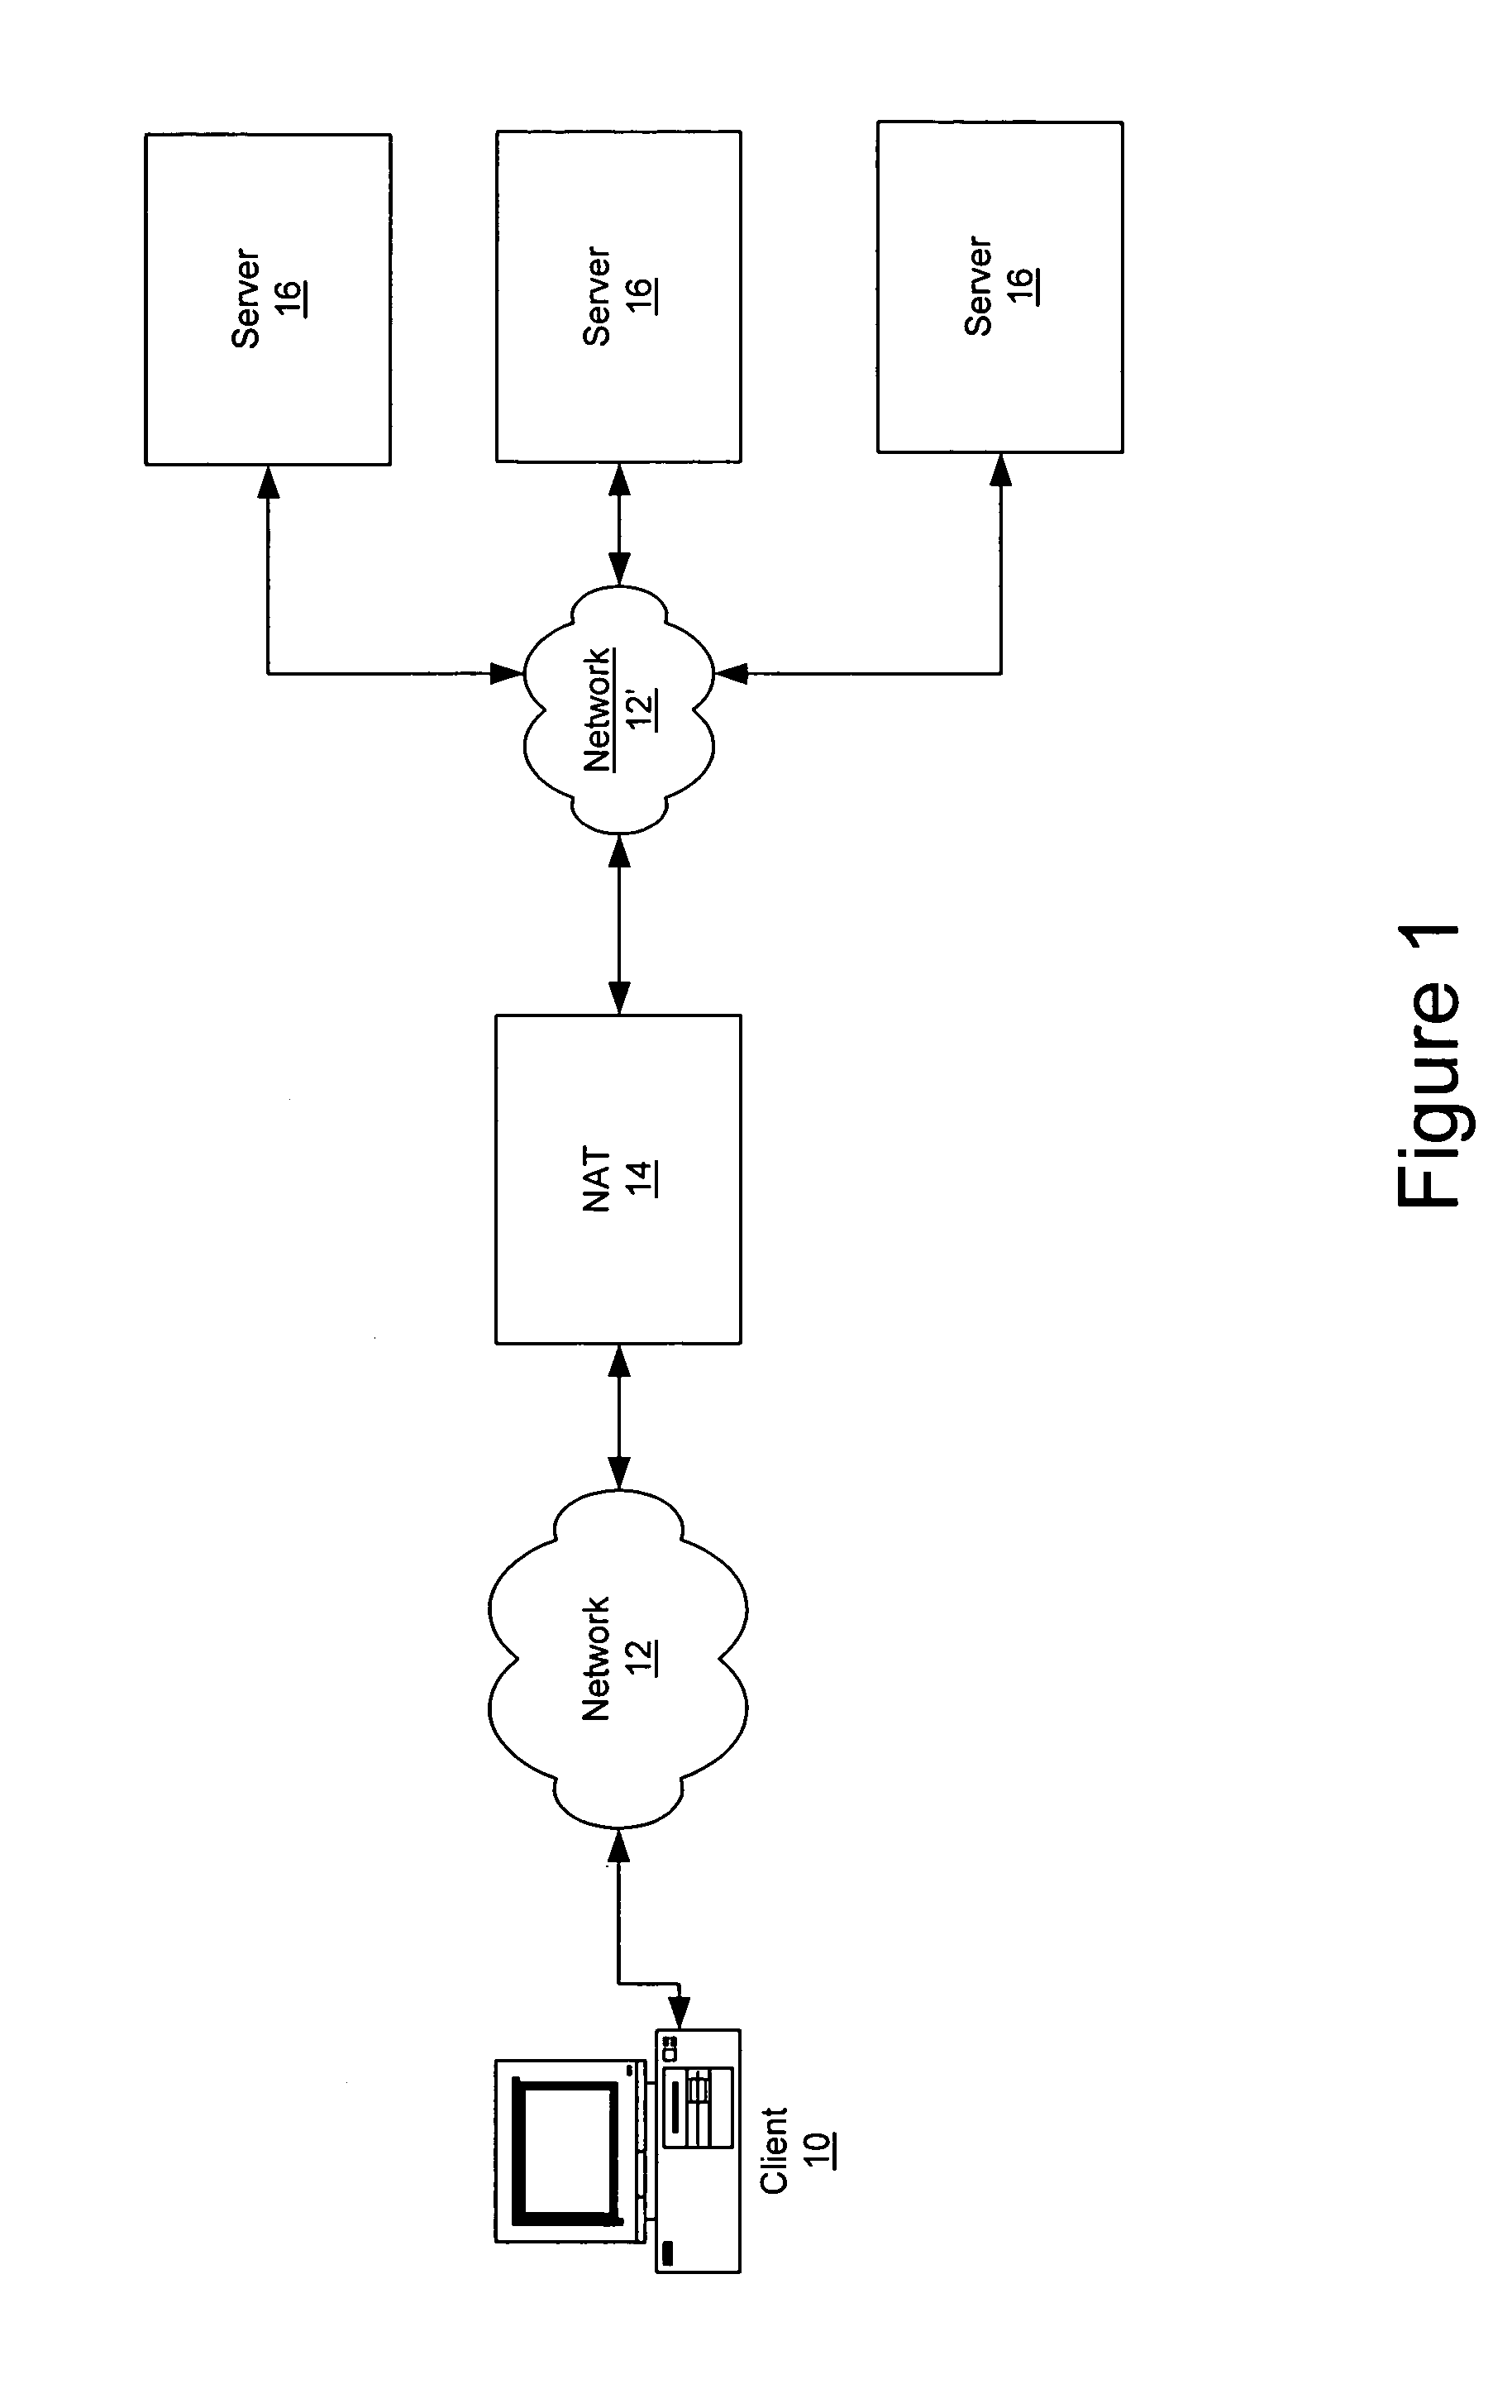 Methods, systems and computer program products for workload distribution based on end-to-end quality of service